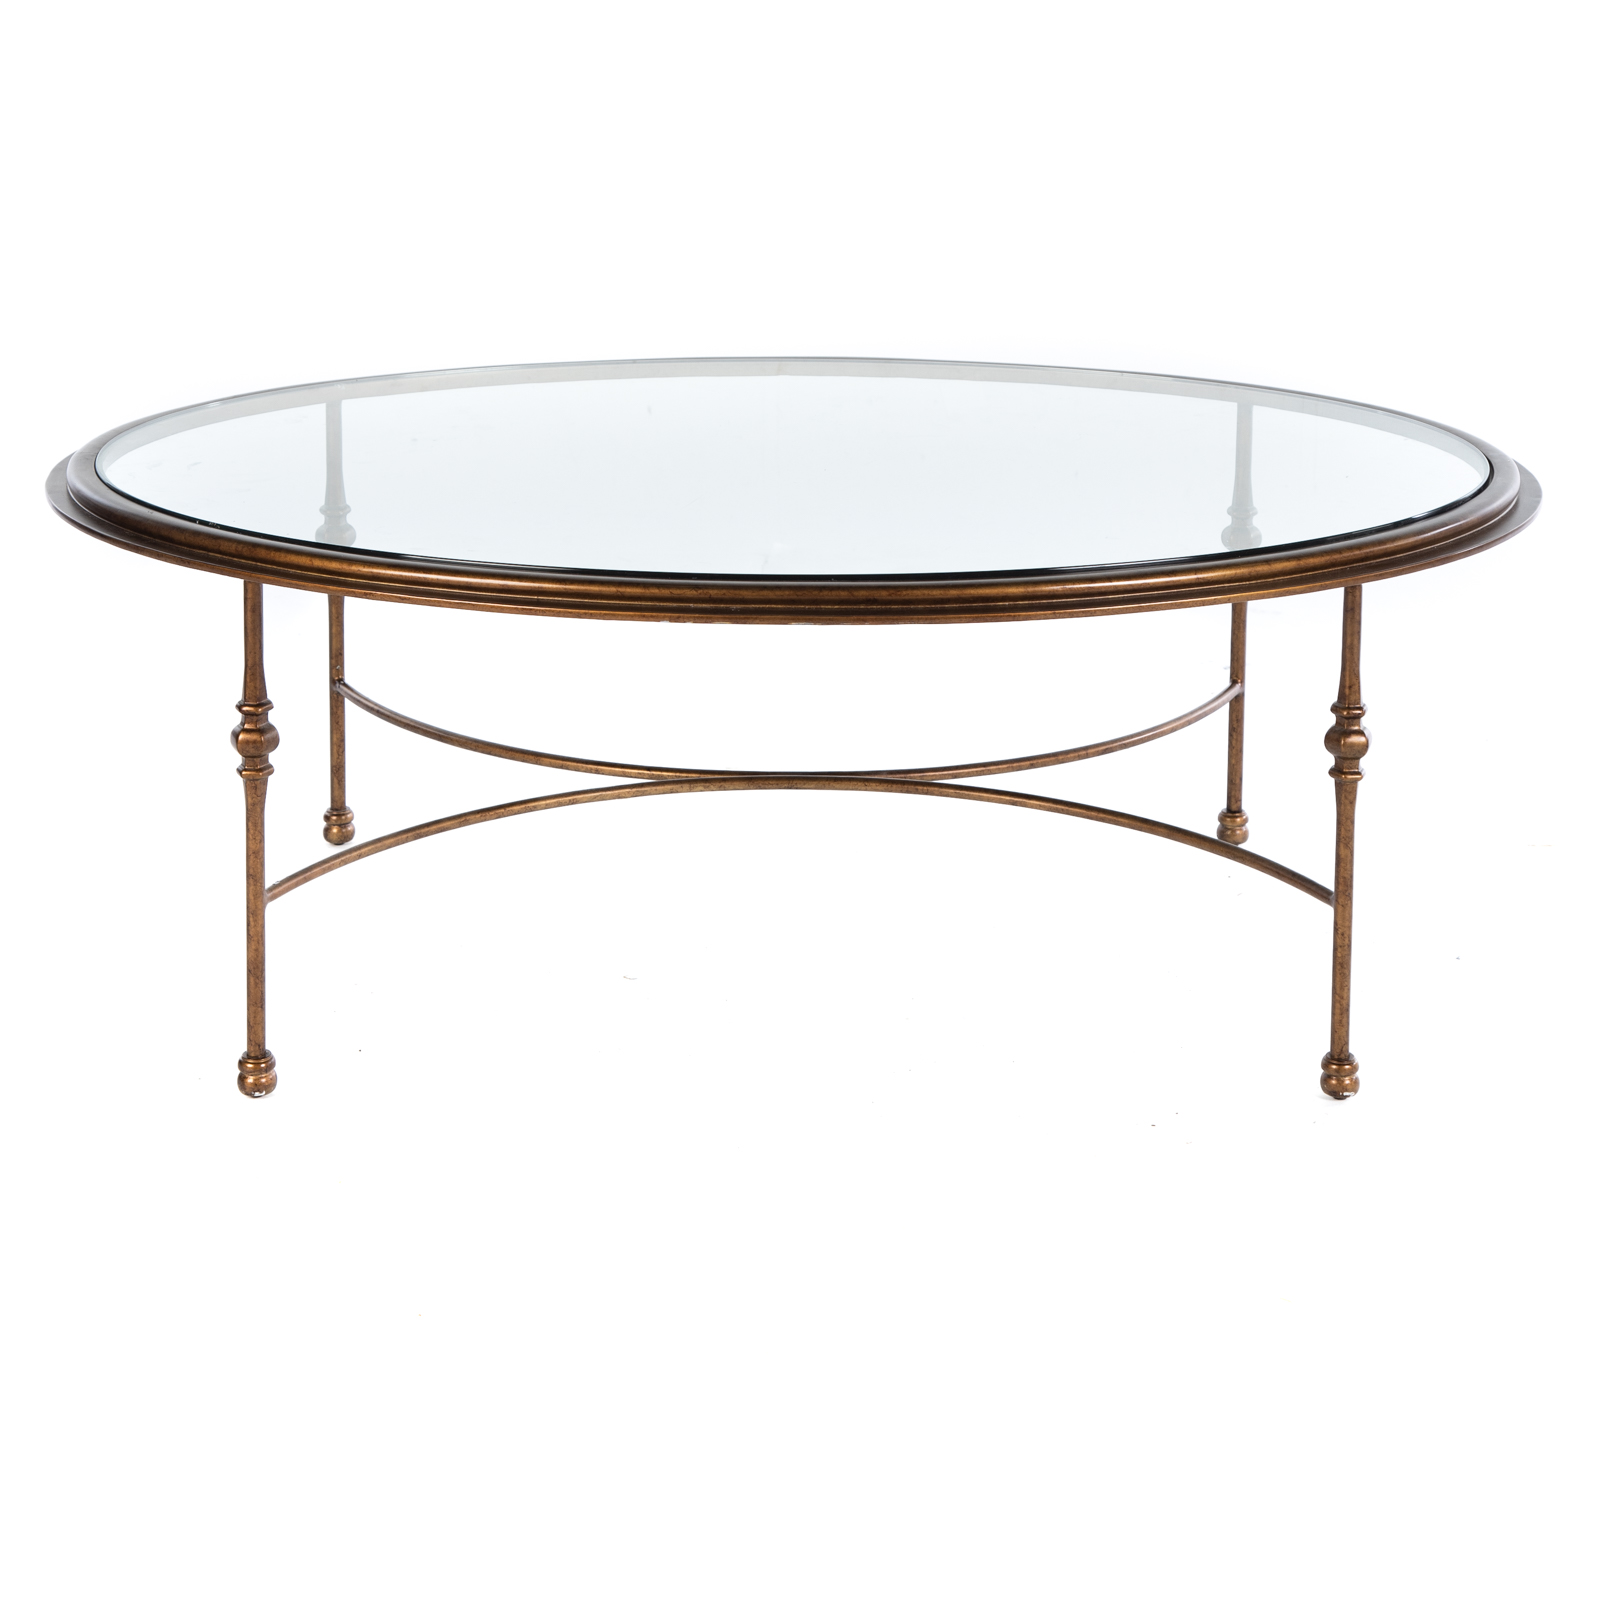 CONTEMPORARY OVAL GLASS TOP COFFEE